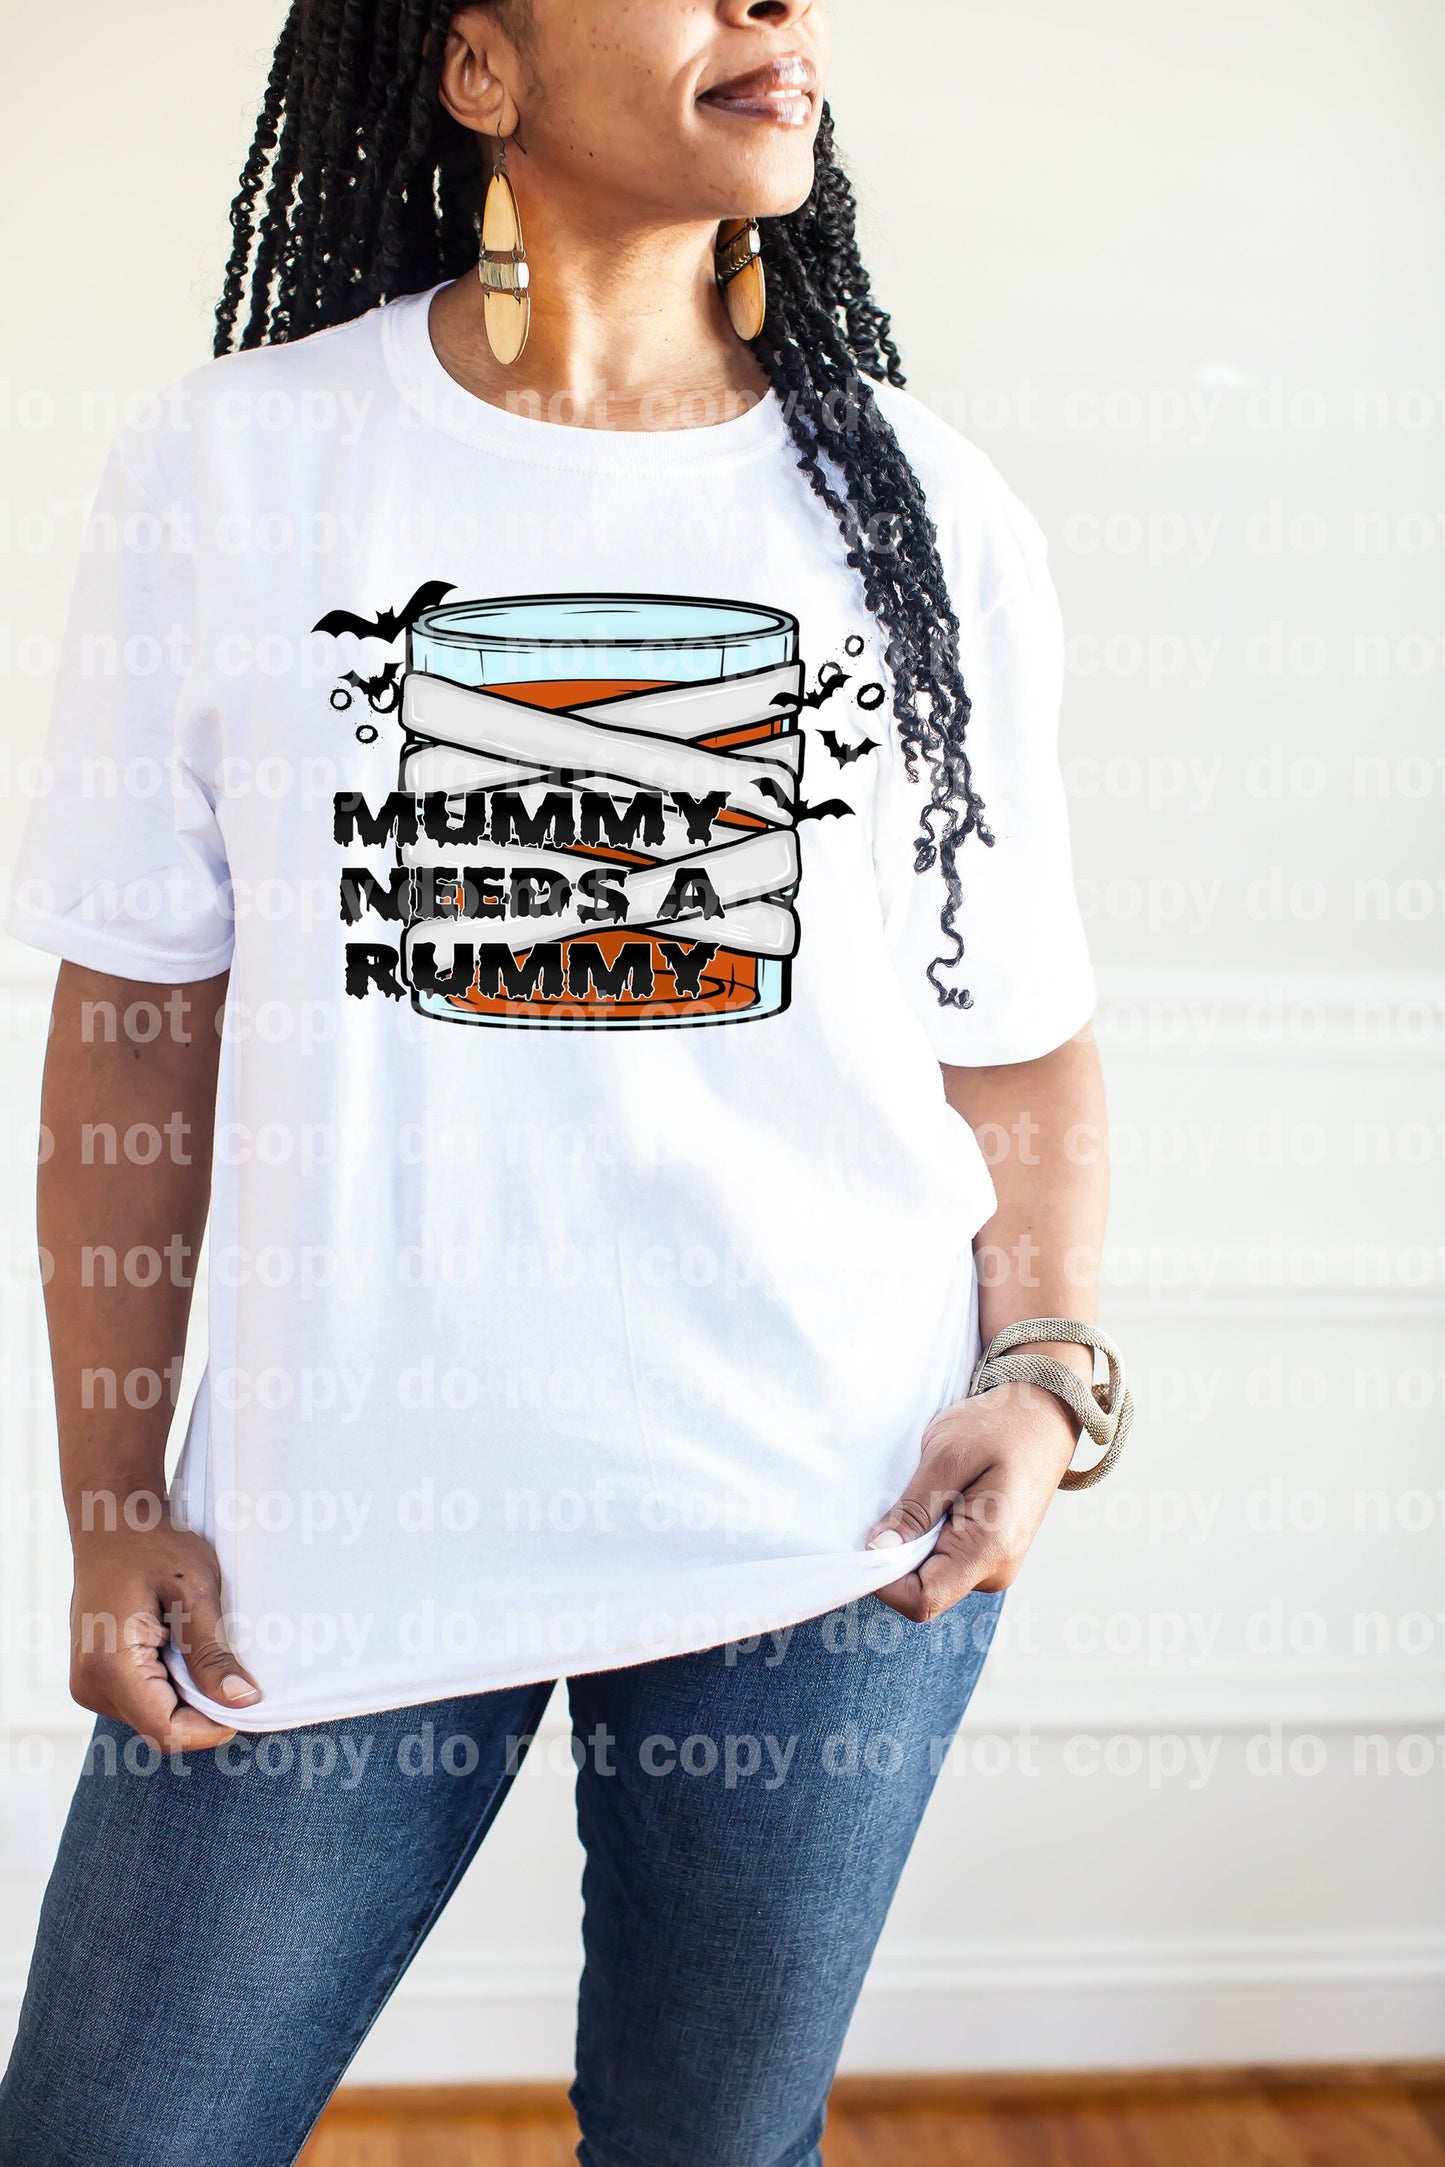 Mummy Needs A Rummy with Pocket Option Dream Print or Sublimation Print